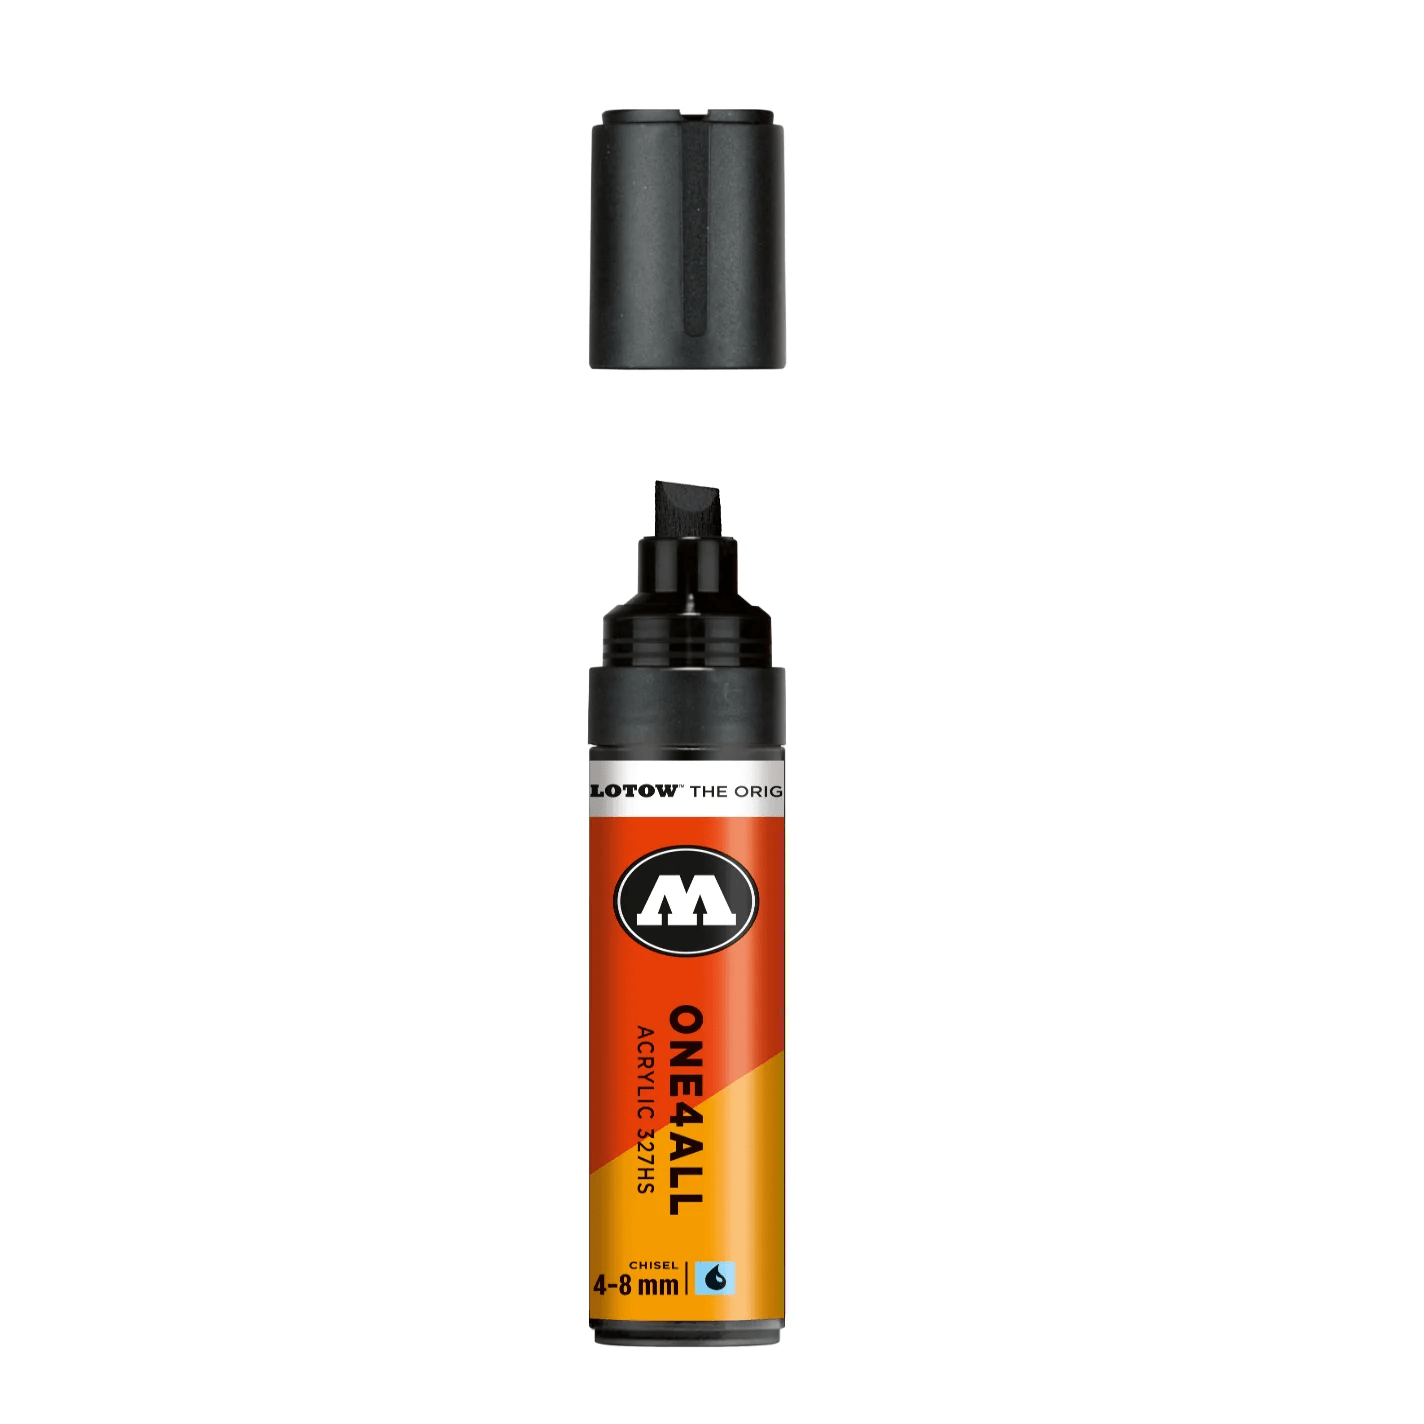 Molotow ONE4ALL Molotow ONE4ALL marker - 4-8mm